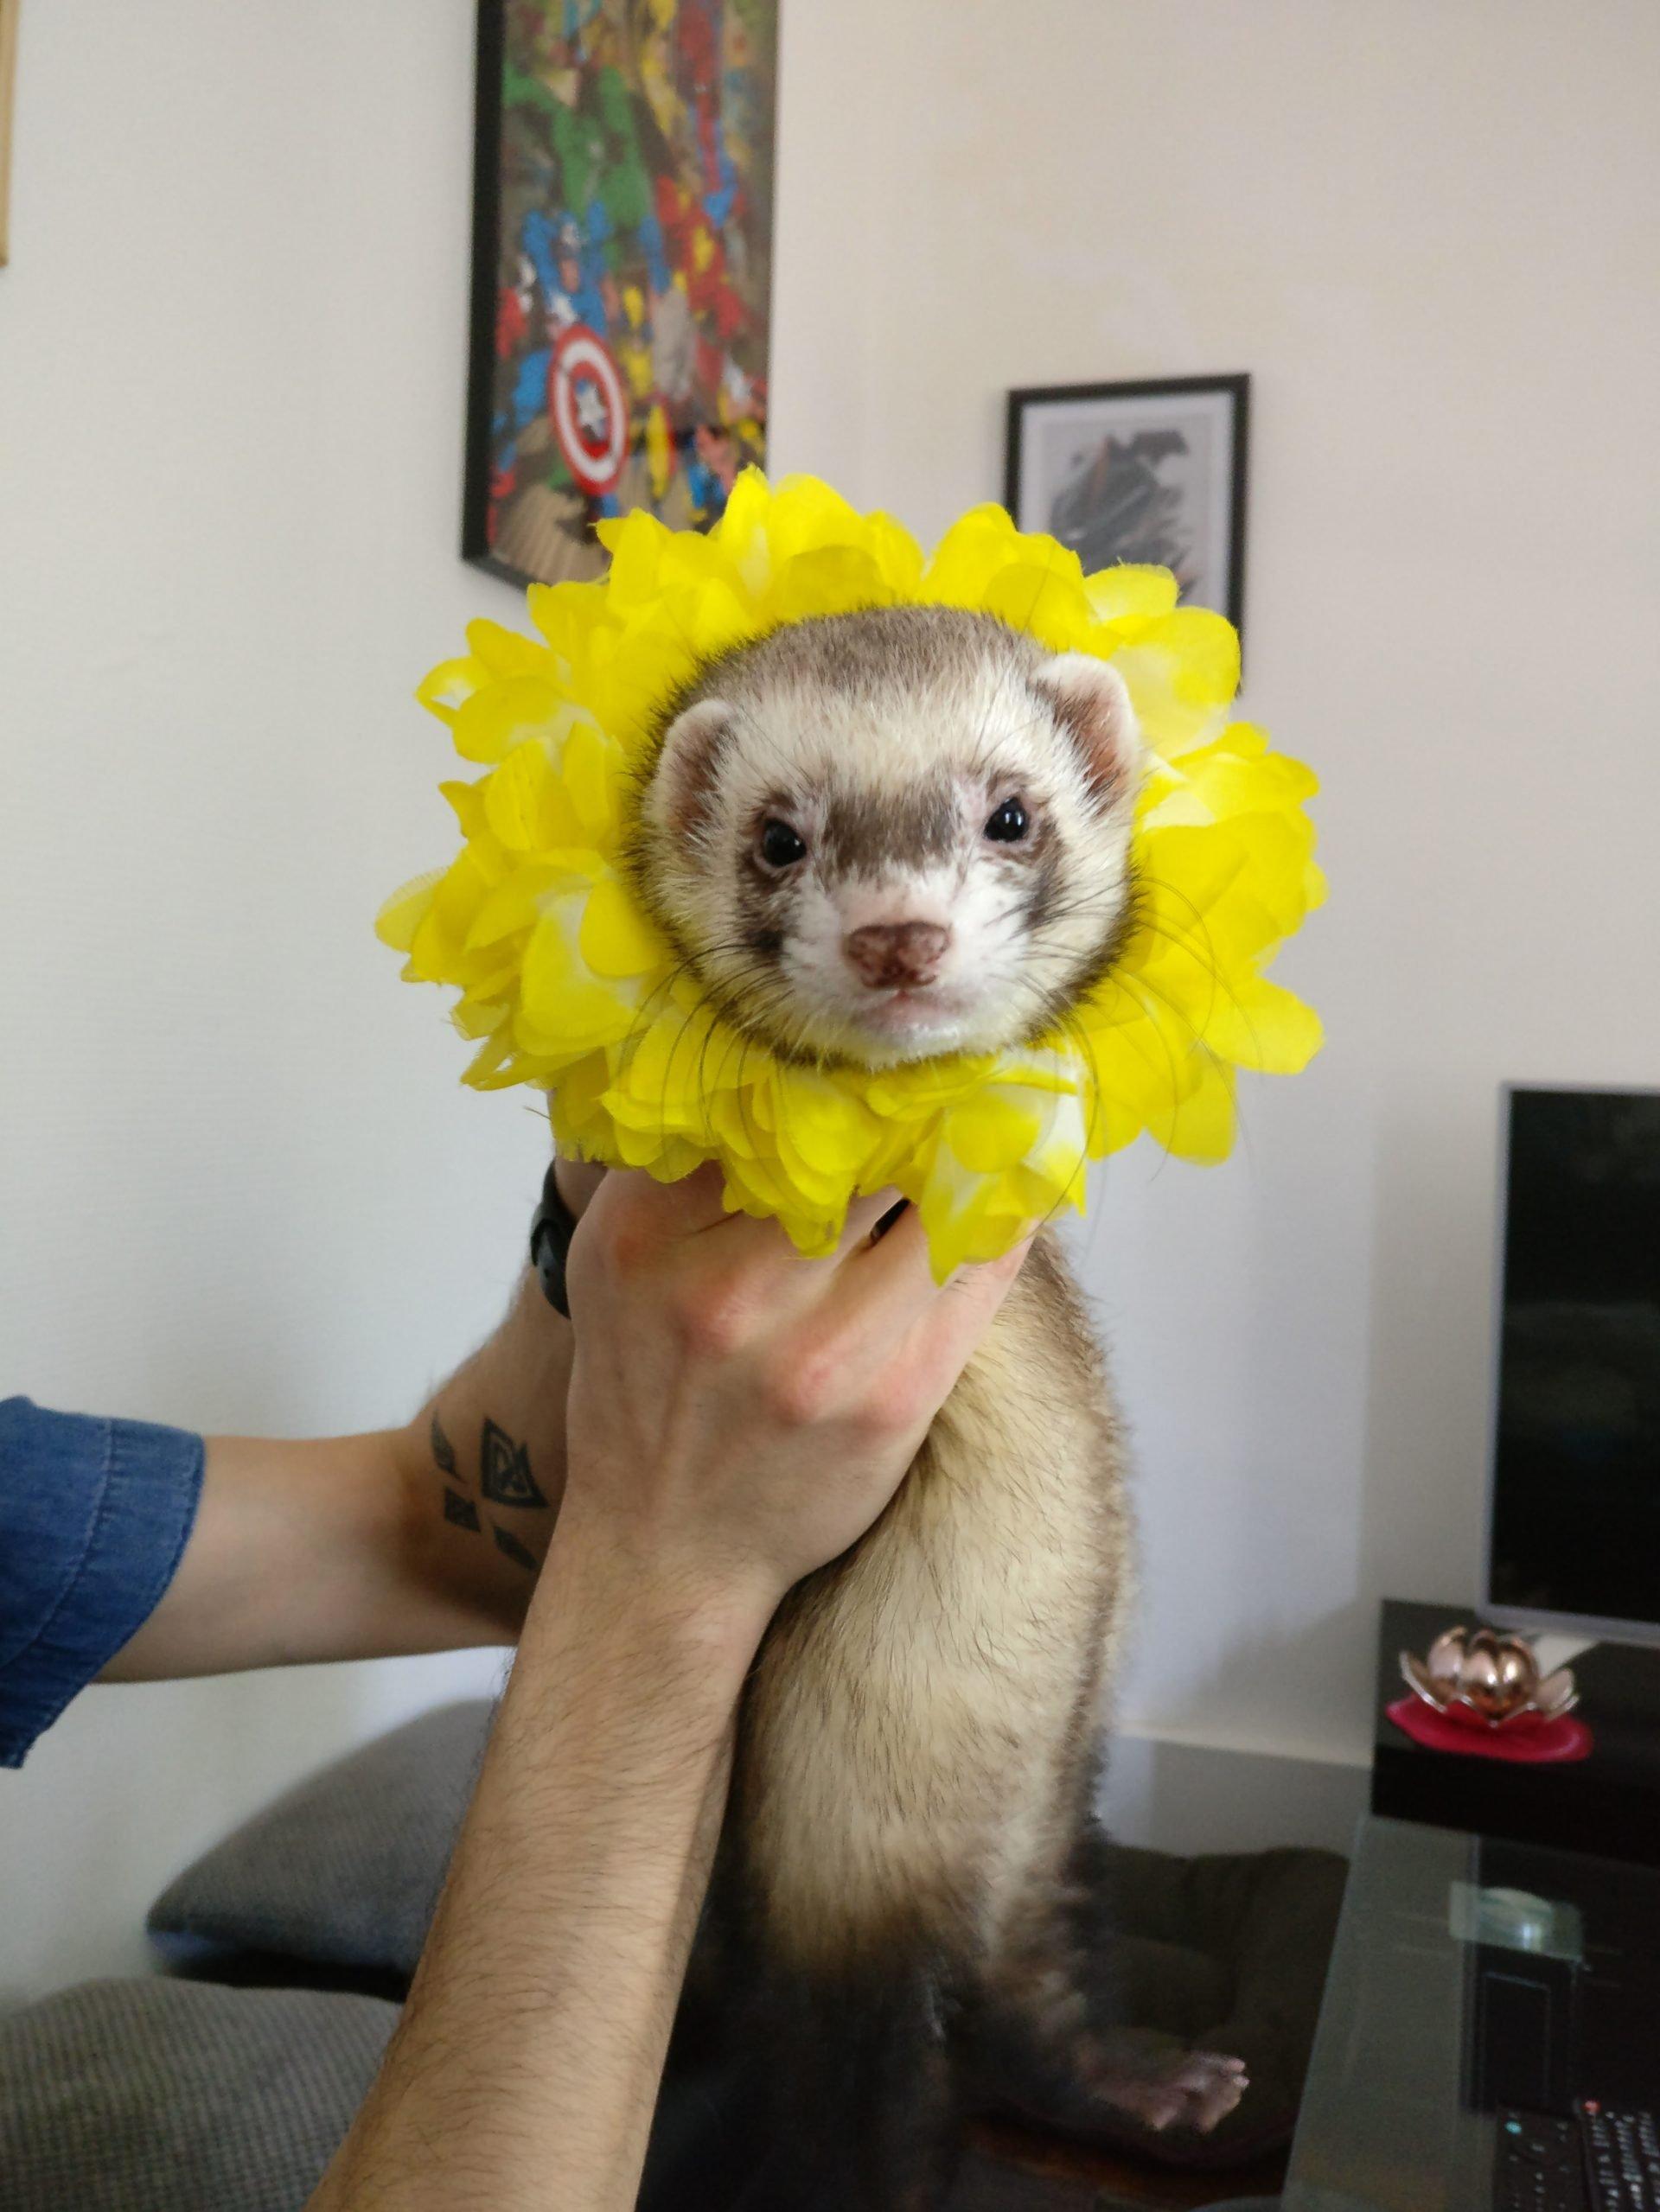 Cute Ferret Photos That Will Make You Smile The Modern